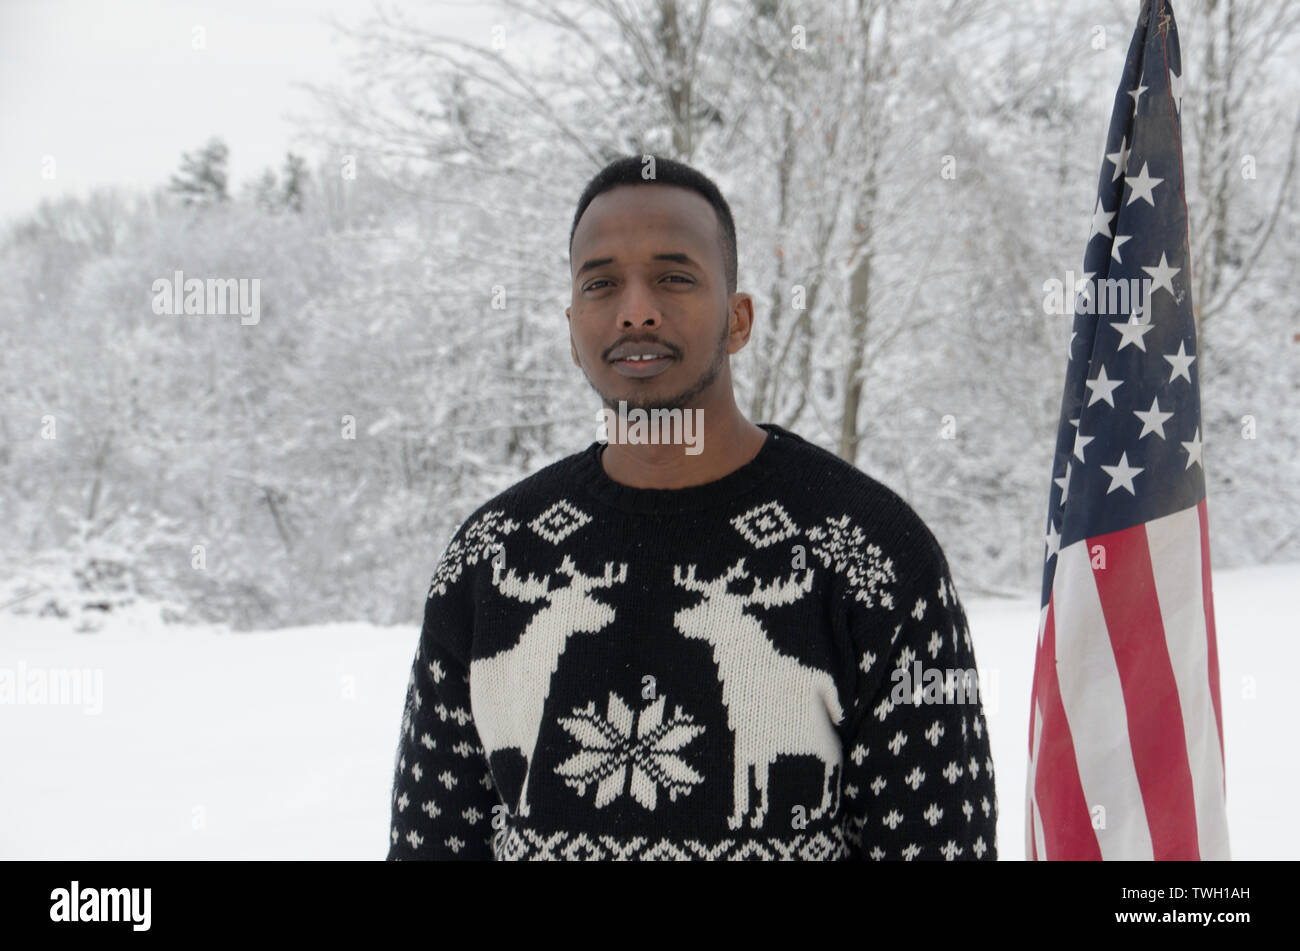 Somali immigrant and author, Abdi Nur Iftin, standing in snowy field with American flag, Yarmouth Maine Stock Photo